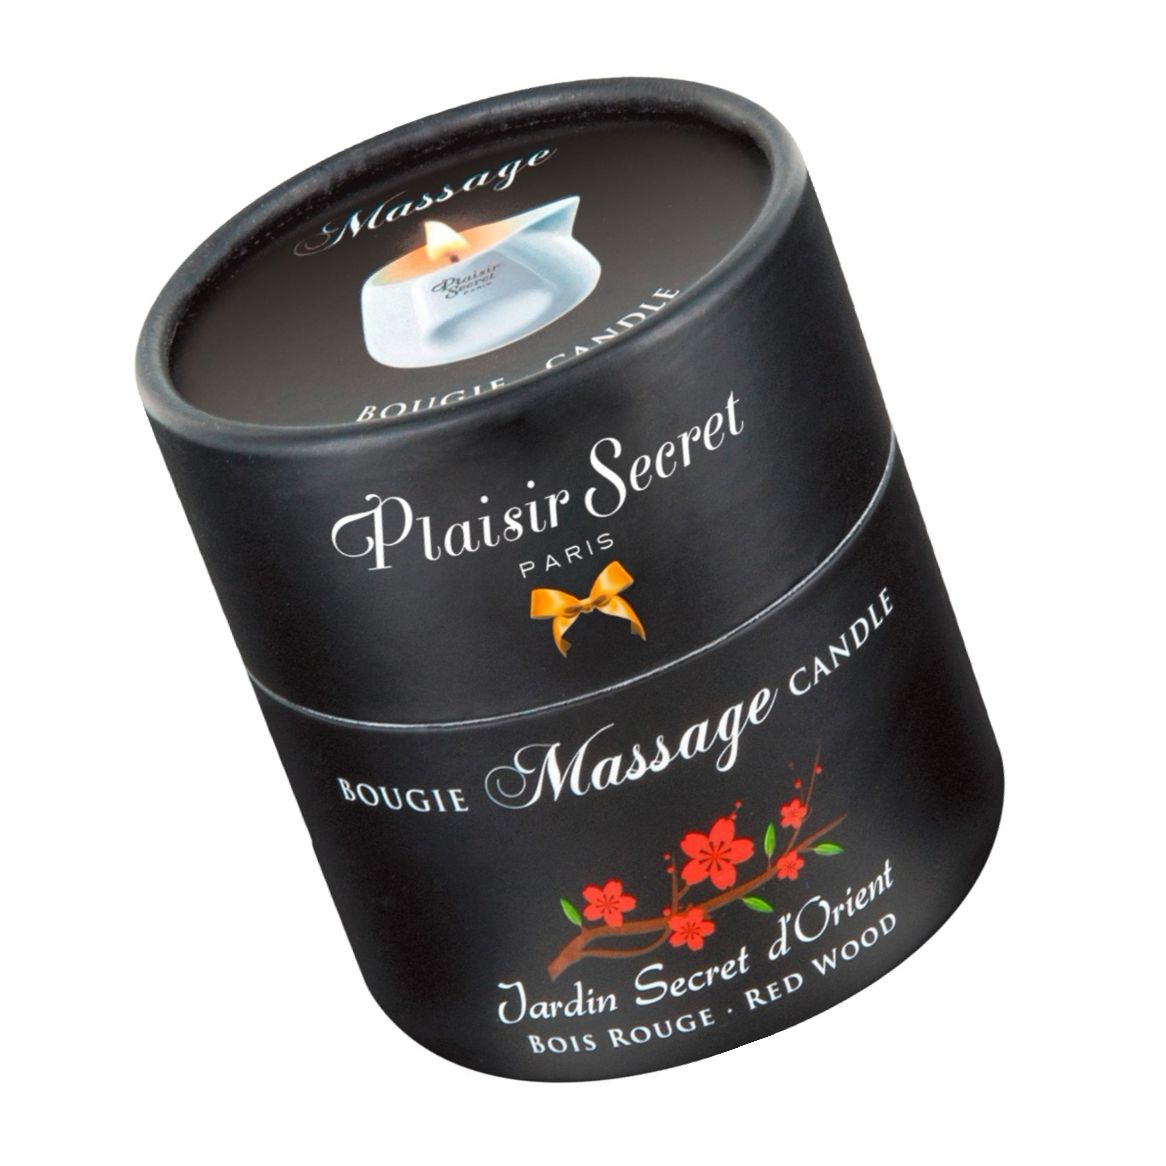 Massage Candle Red Wood